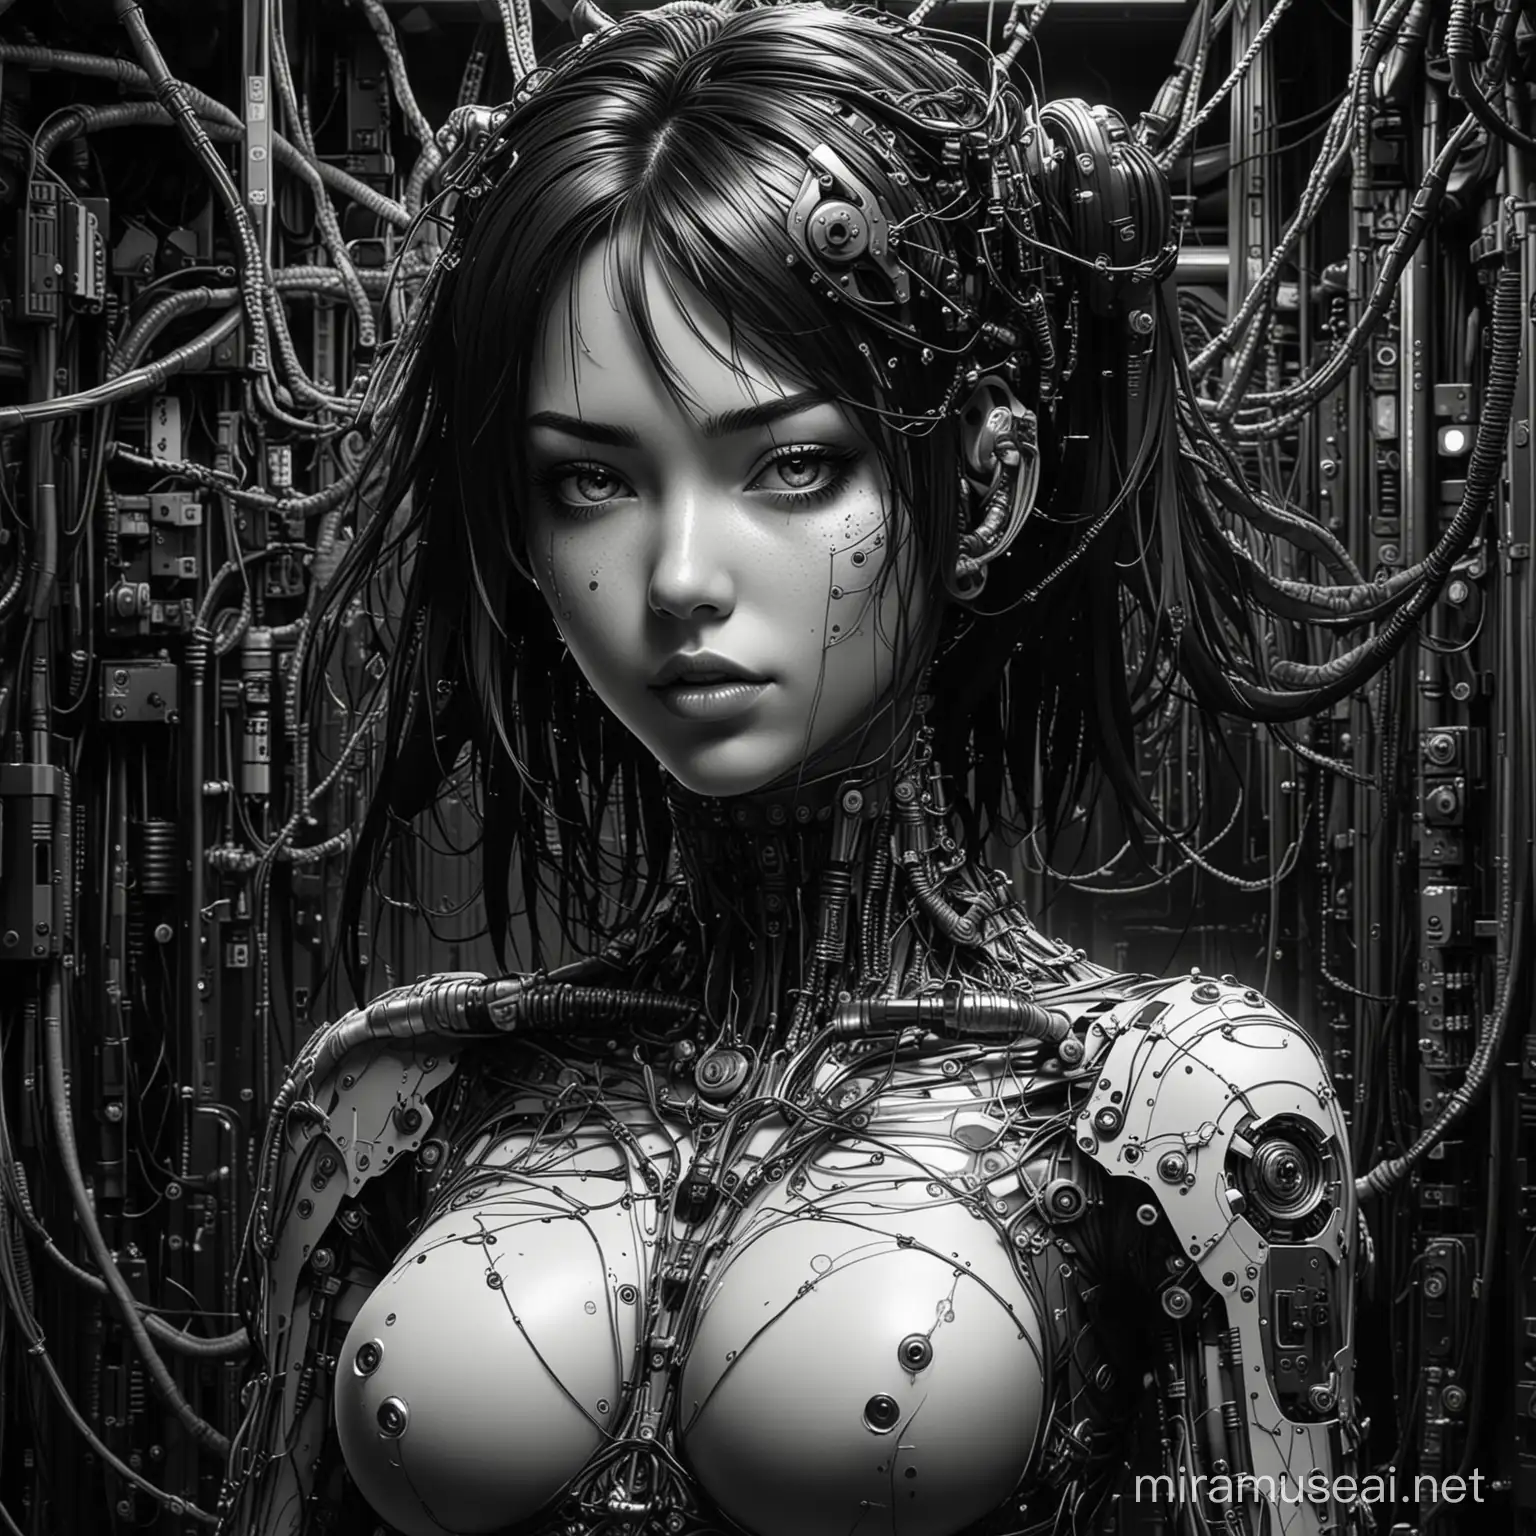 beautiful xenotrip girl , cyberpunk core machines, body connected cables and wires, action pose, in dark black and white drawing, intricate to detail of 90 manga art style, anime aesthetic, pulp comics, heavy chiaroscuro, Taiyo Matsumoto, yayoi kusama, becky cloonan, Katsuhiro Otomo style, giger style, t-shirt art style . dark palette